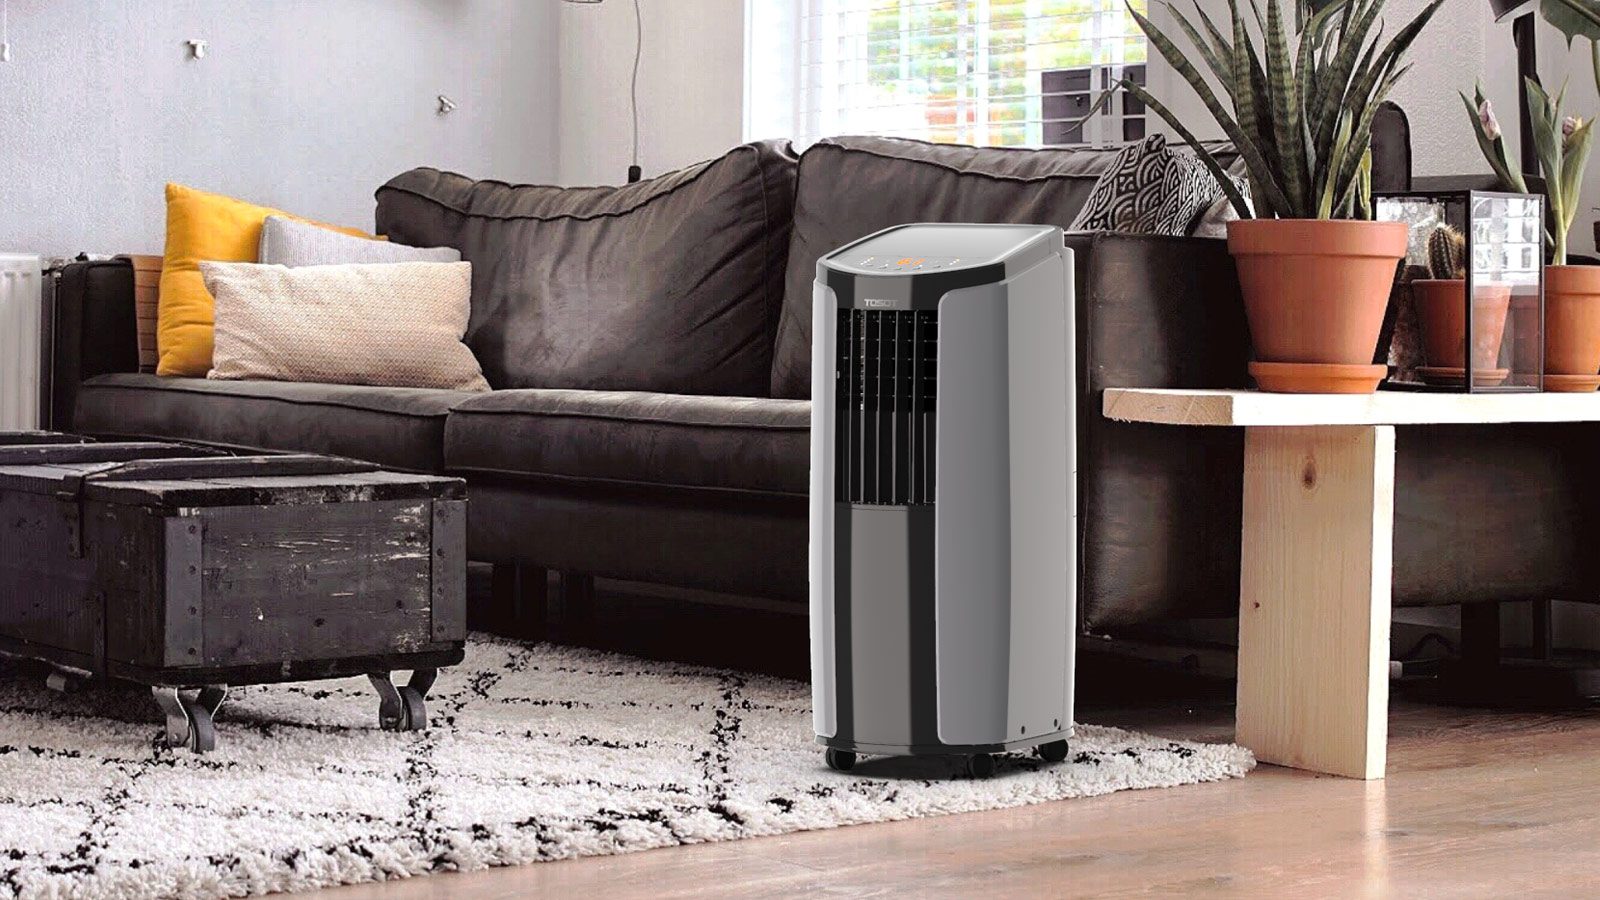 Airthereal TOSOT Portable Air Conditioner